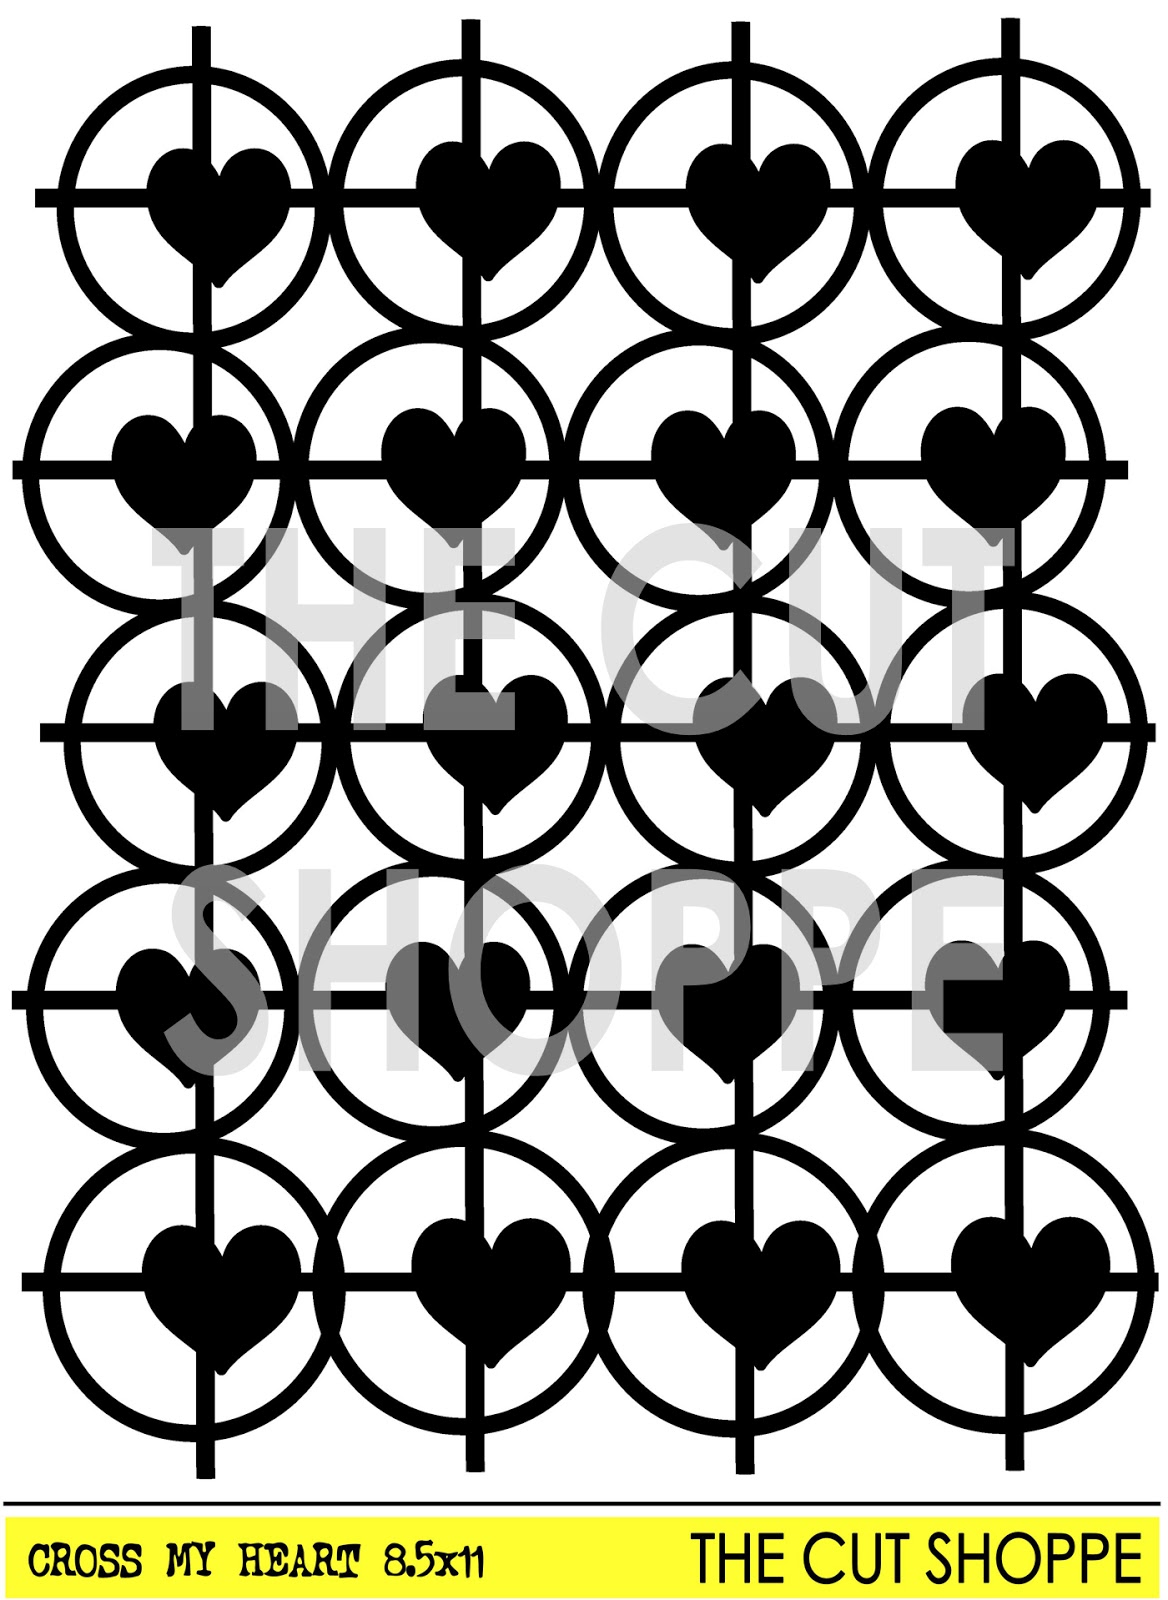 https://www.etsy.com/listing/197472094/the-cross-my-heart-background-cut-file?ref=shop_home_active_5